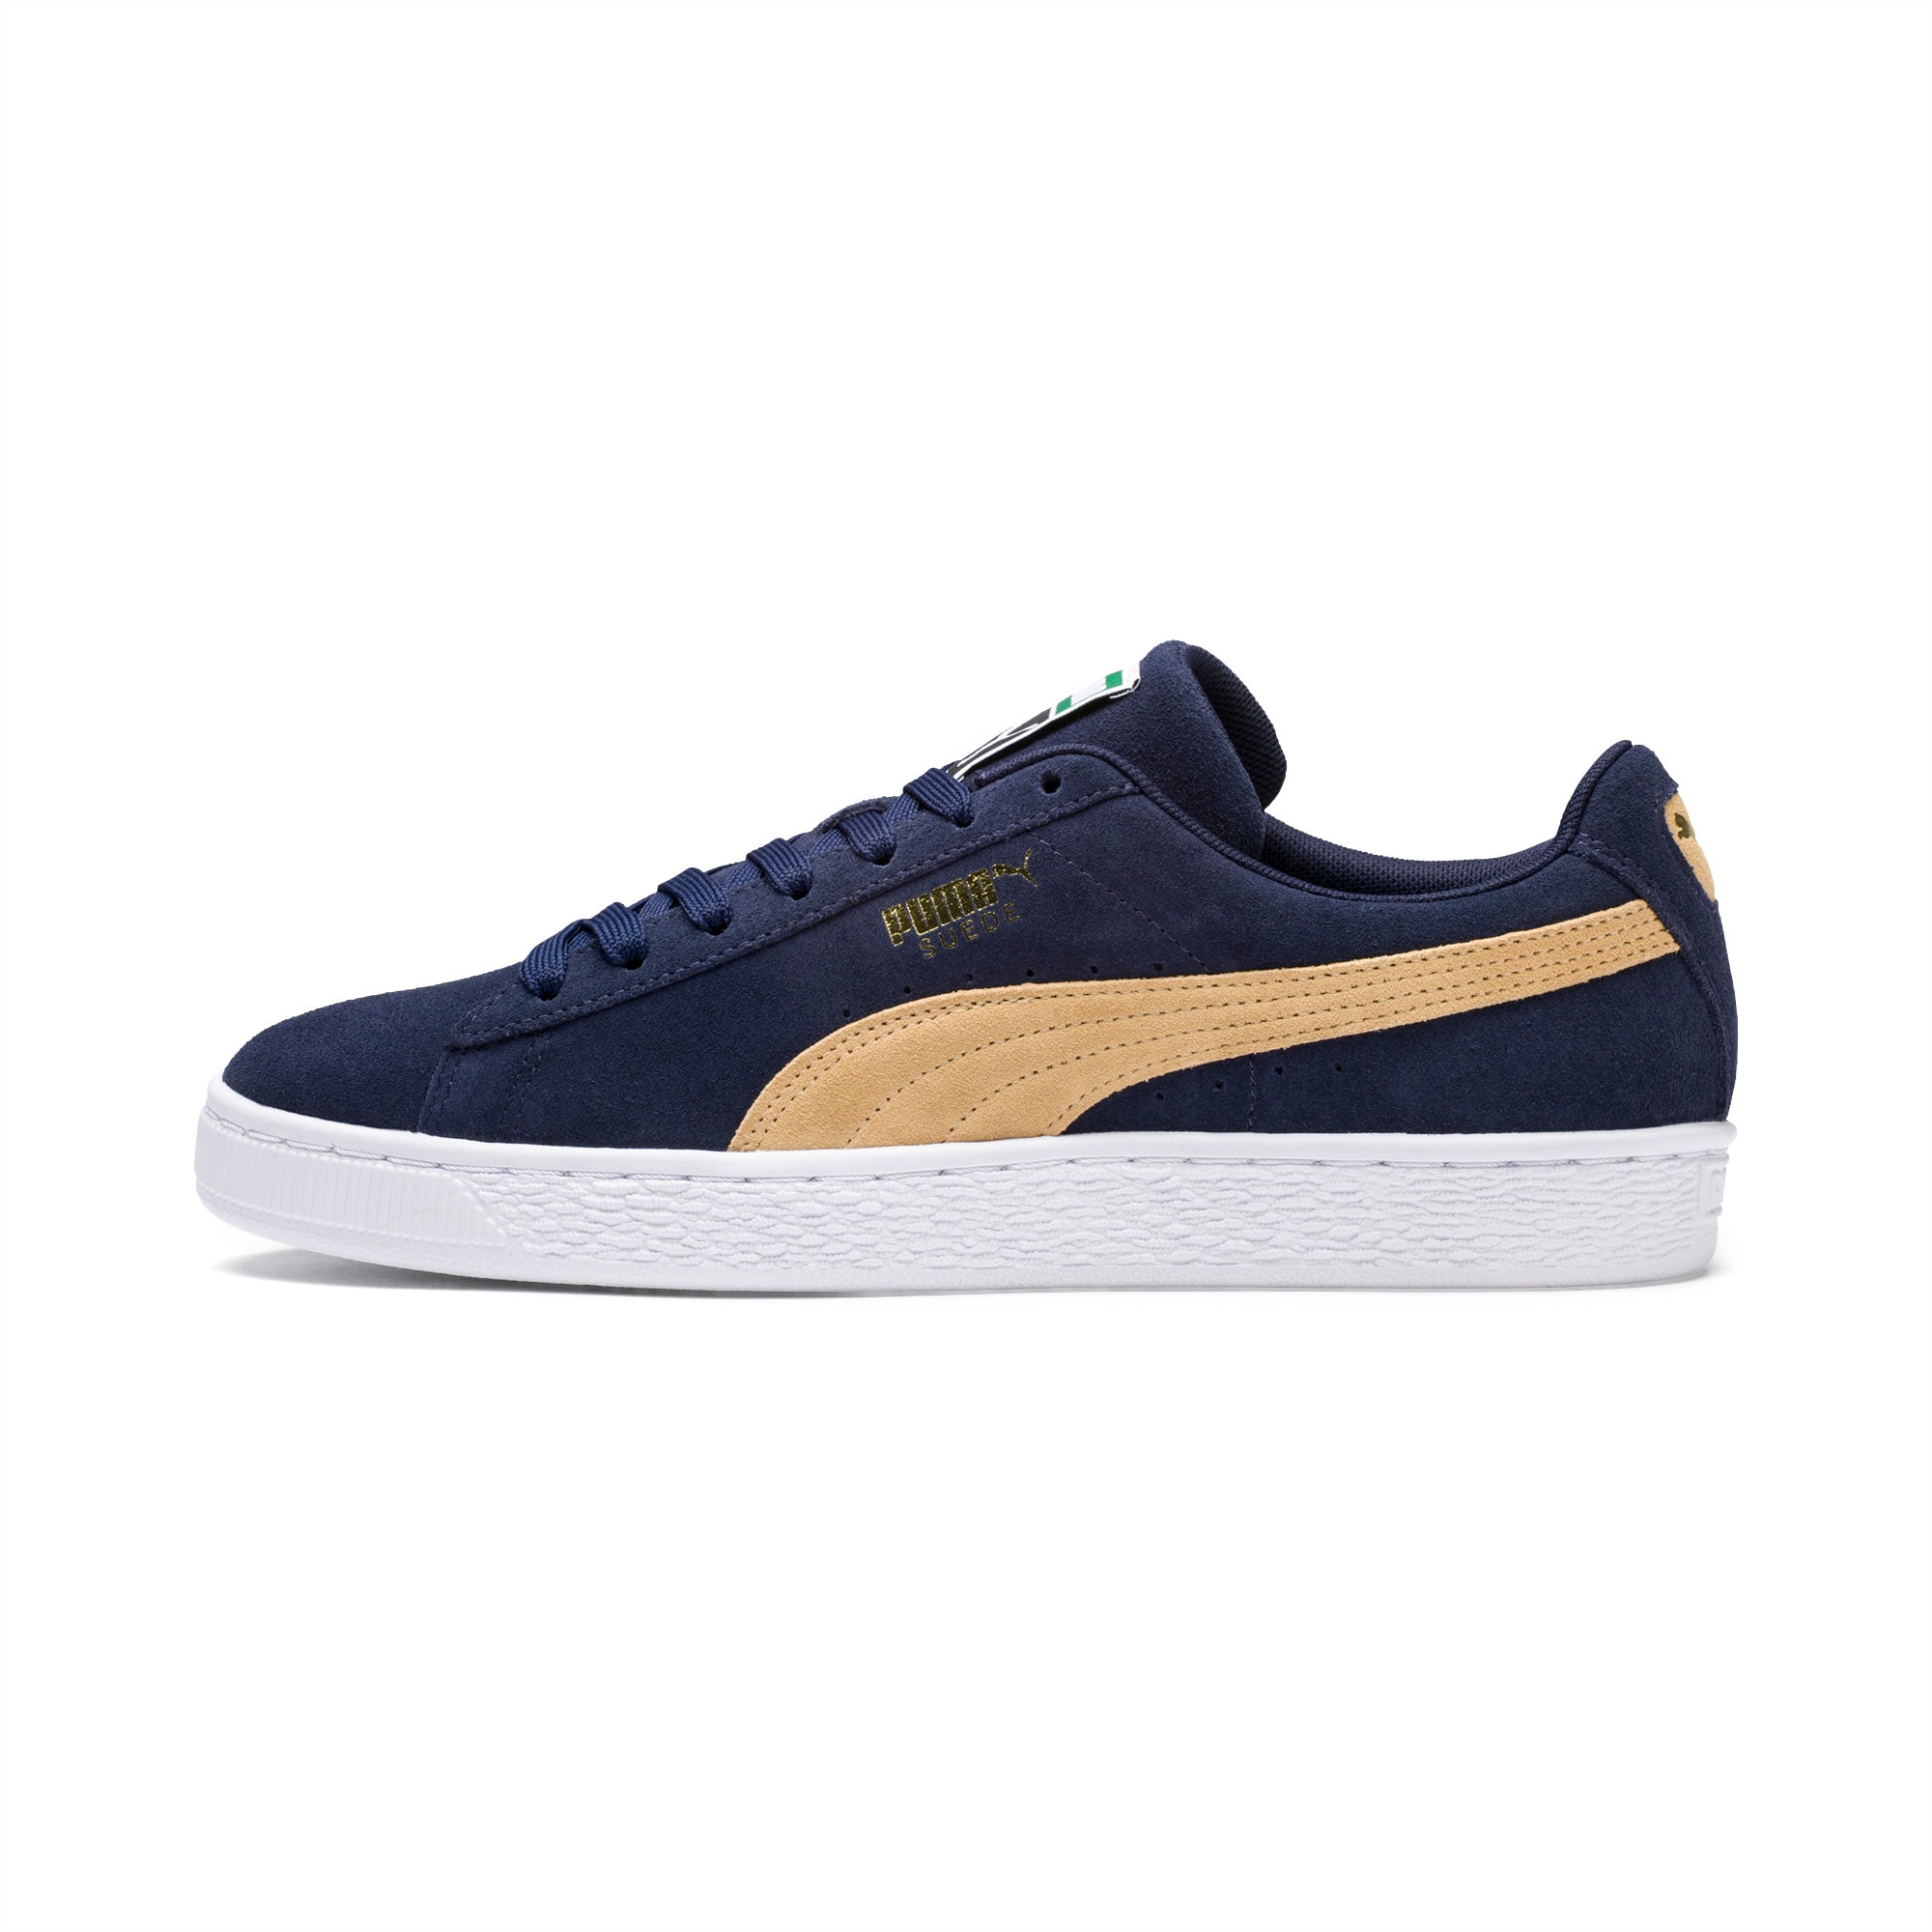 suede classic trainers